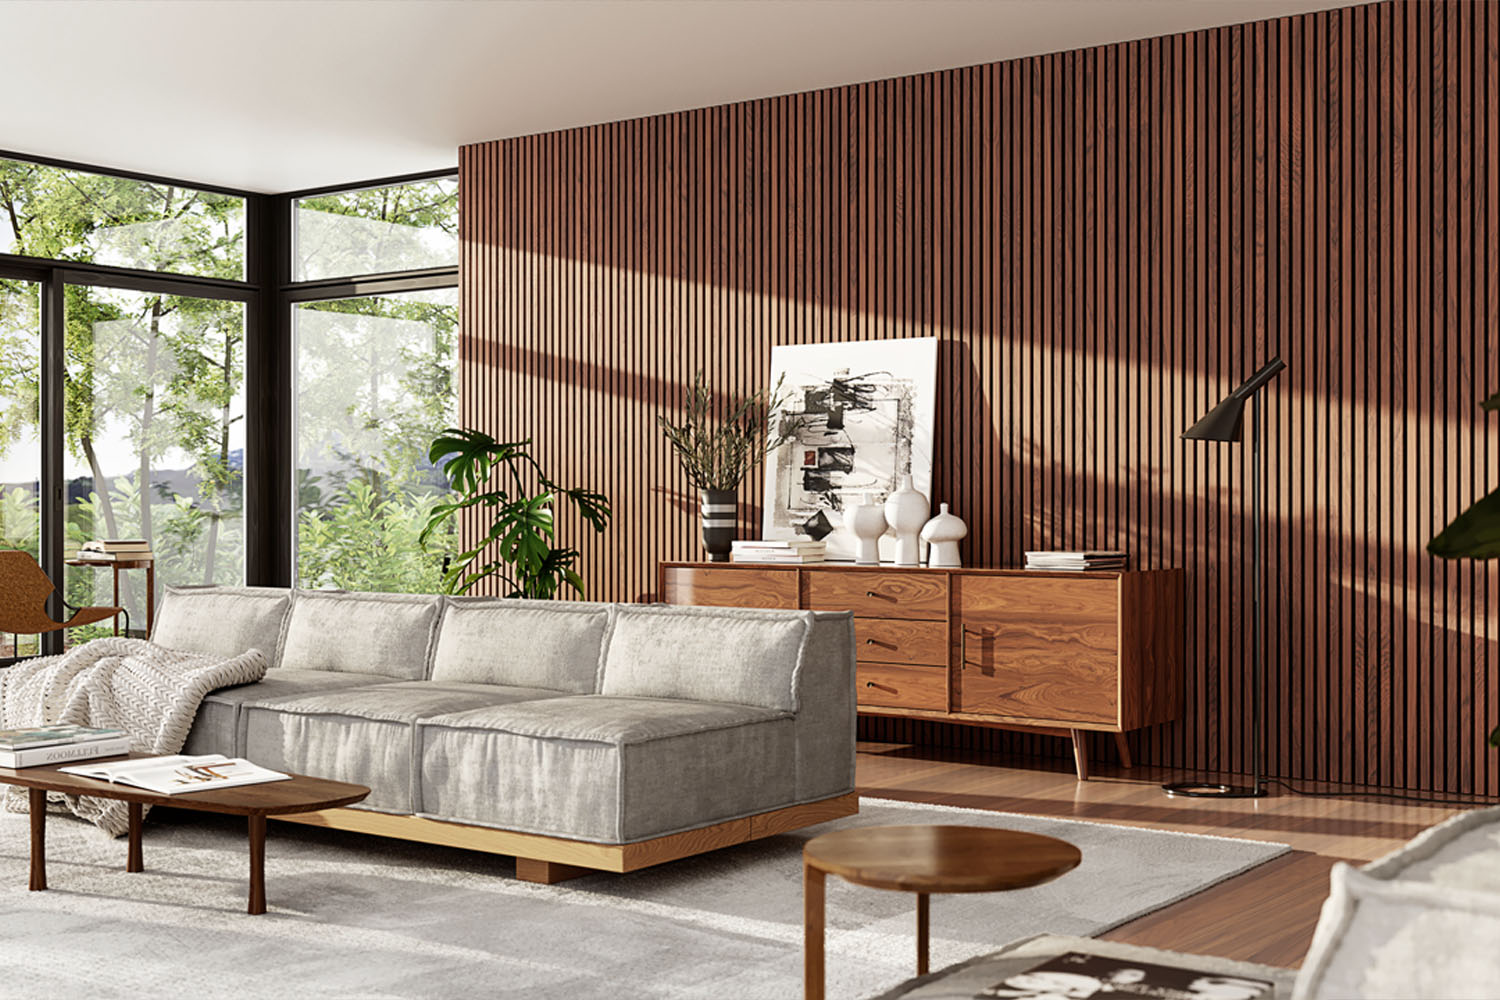 sunny midcentury modern living room with vertical wood slat walnut accent wall